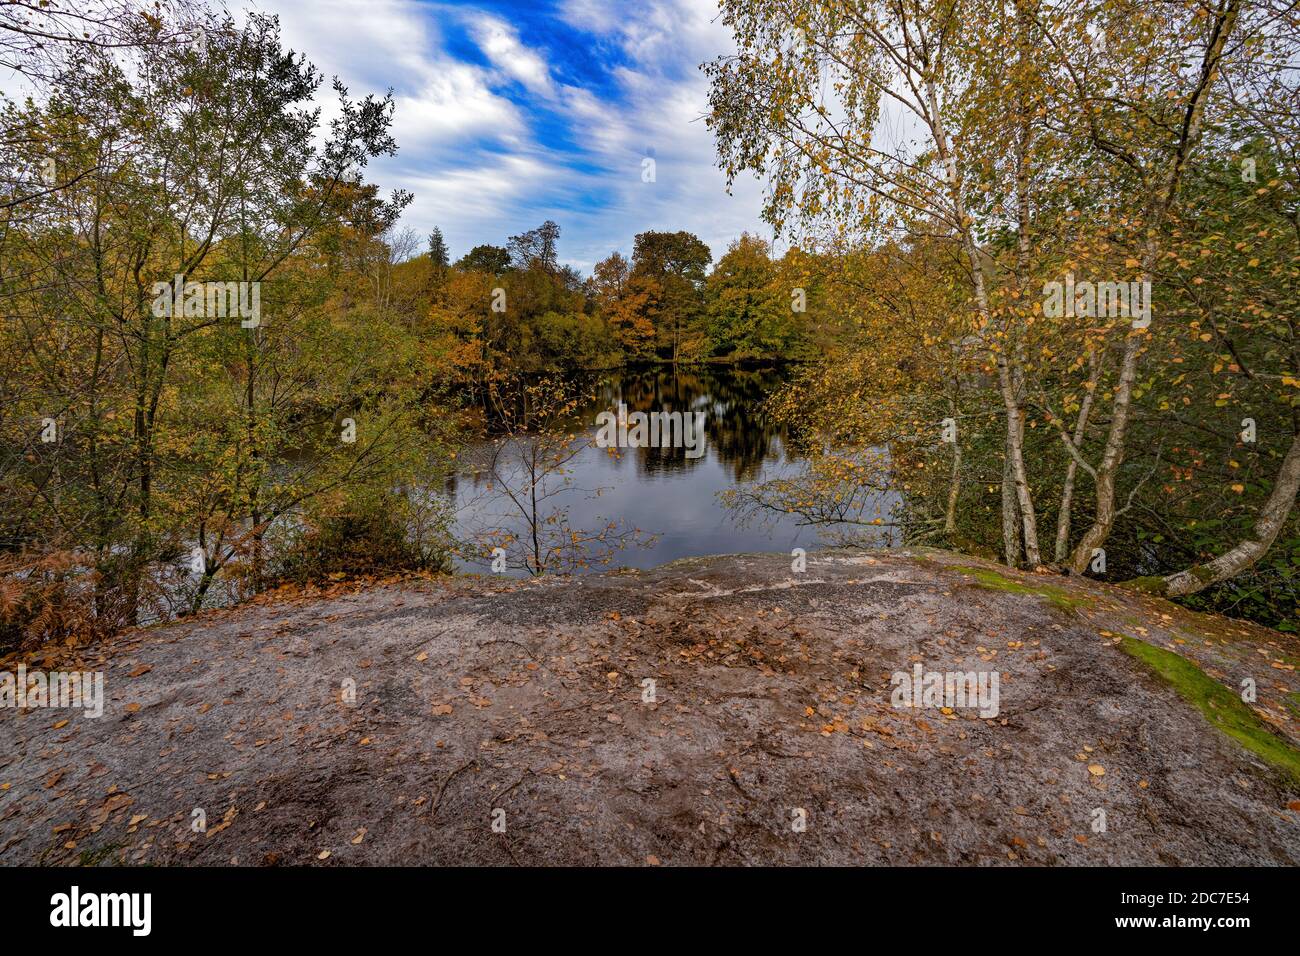 Autunno a Lake Wood, Uckfiled, East Sussex, Inghilterra, Regno Unito. Foto Stock